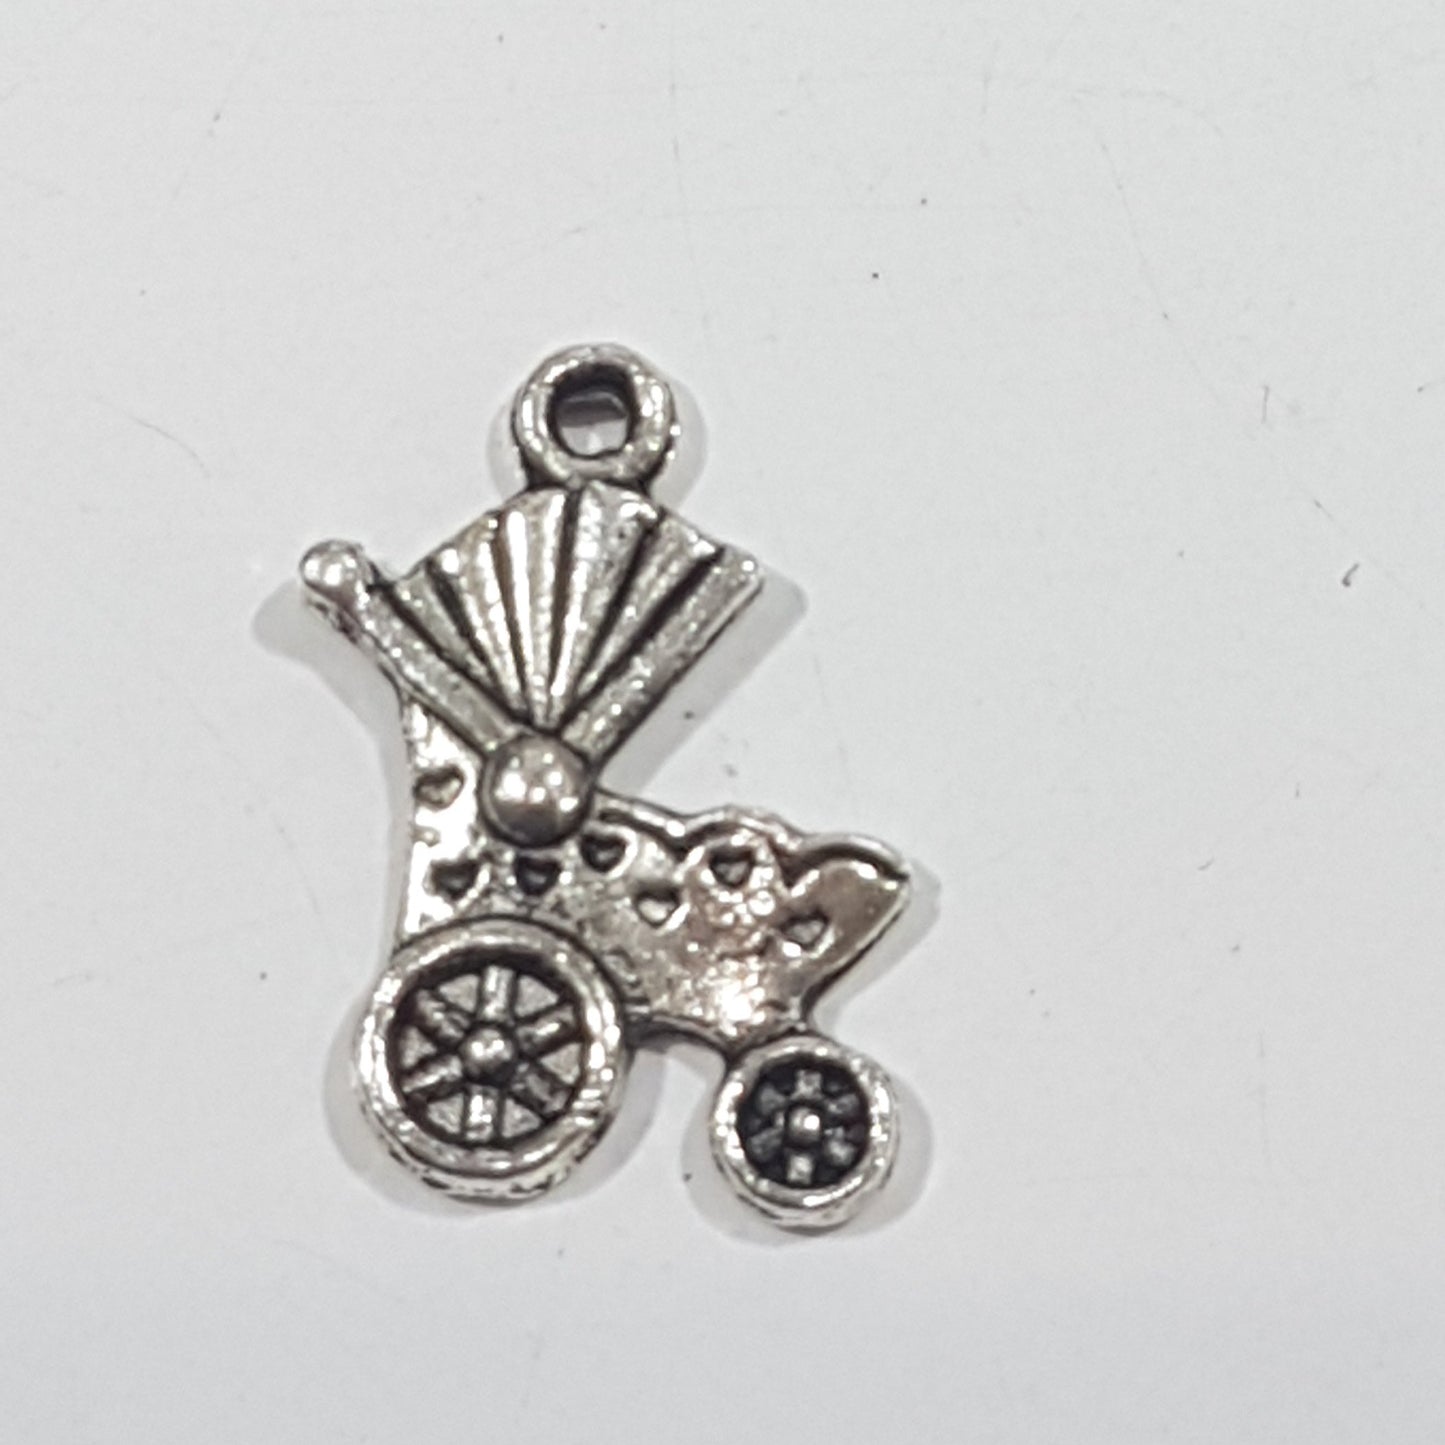 Silver Vintage Style Baby Carriage Charm